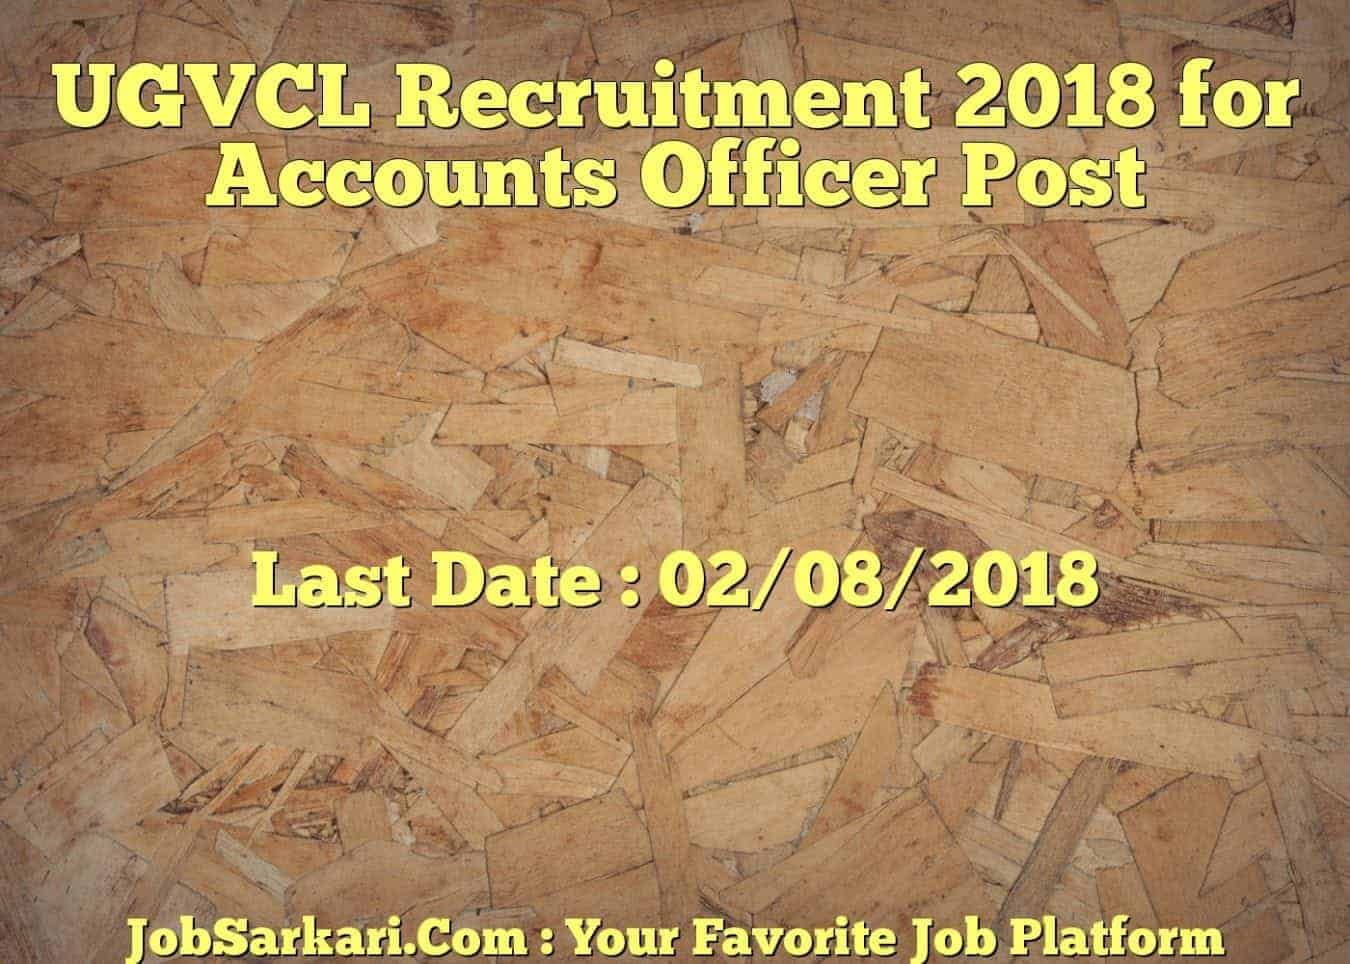 UGVCL Recruitment 2018 for Accounts Officer Post